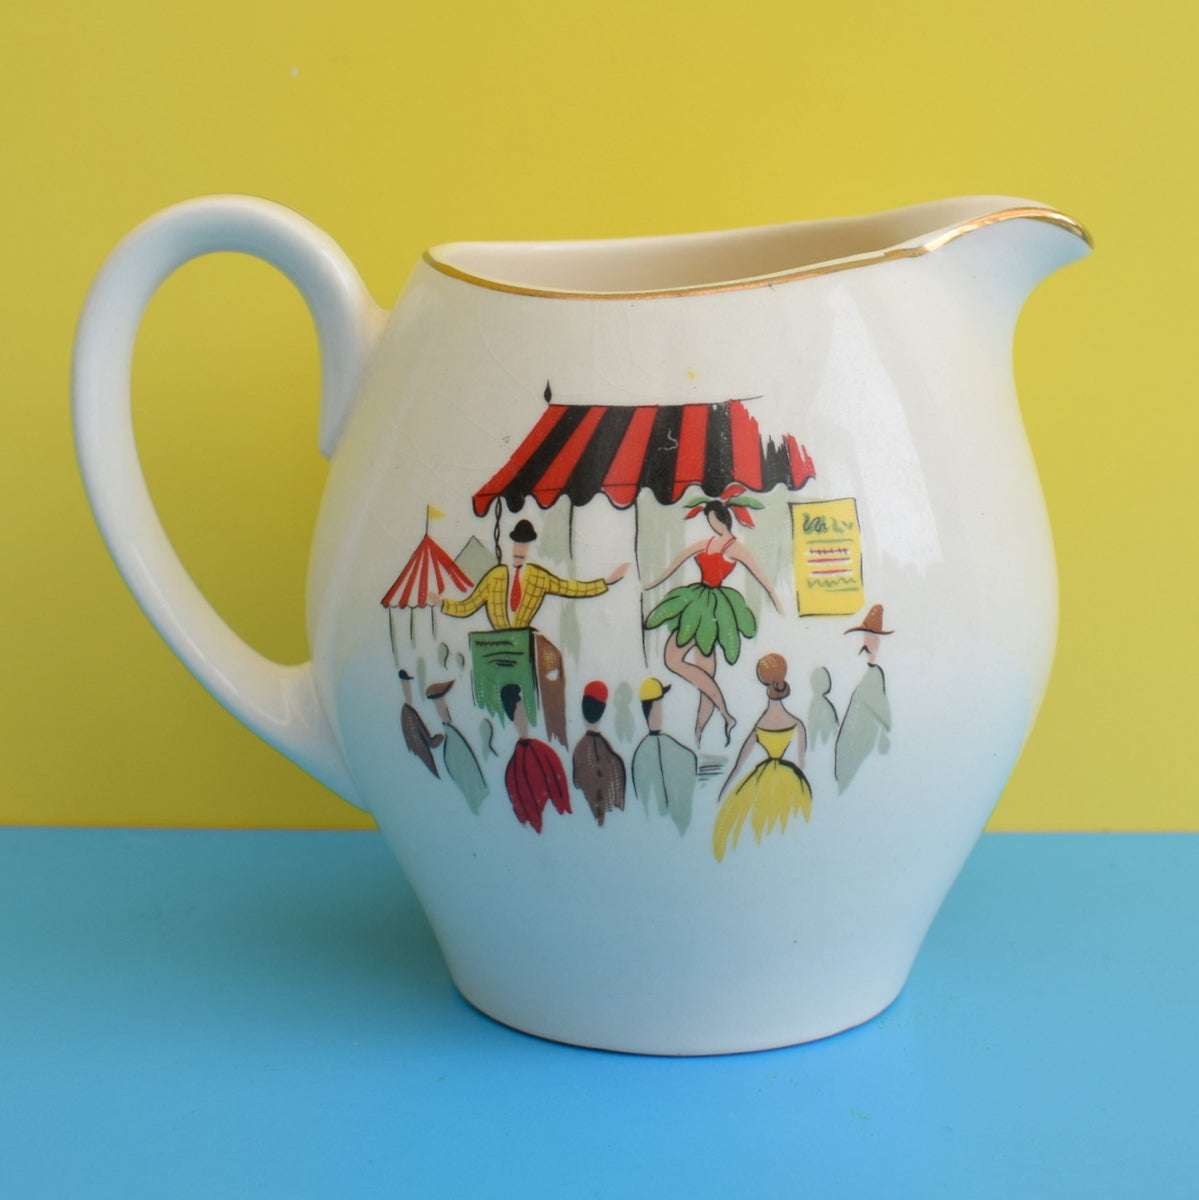 Vintage 1950s Kitsch Alfred Meakin Custard Jugs - Carousel , Red Sails & Covered Wagon